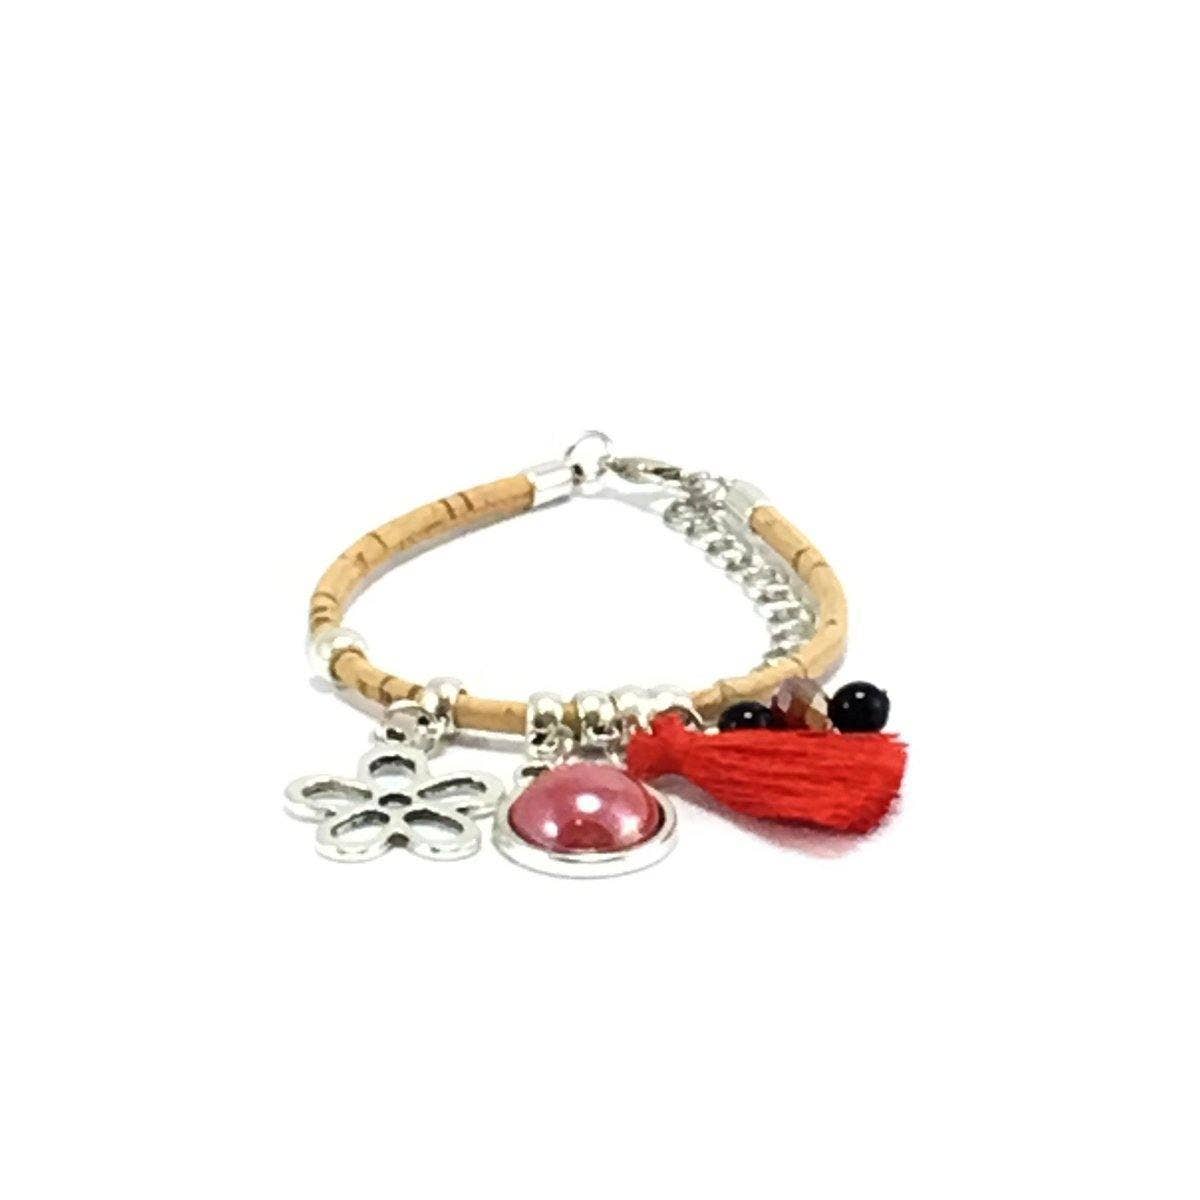 Cork Bracelet with Red Tassels and Little Charms